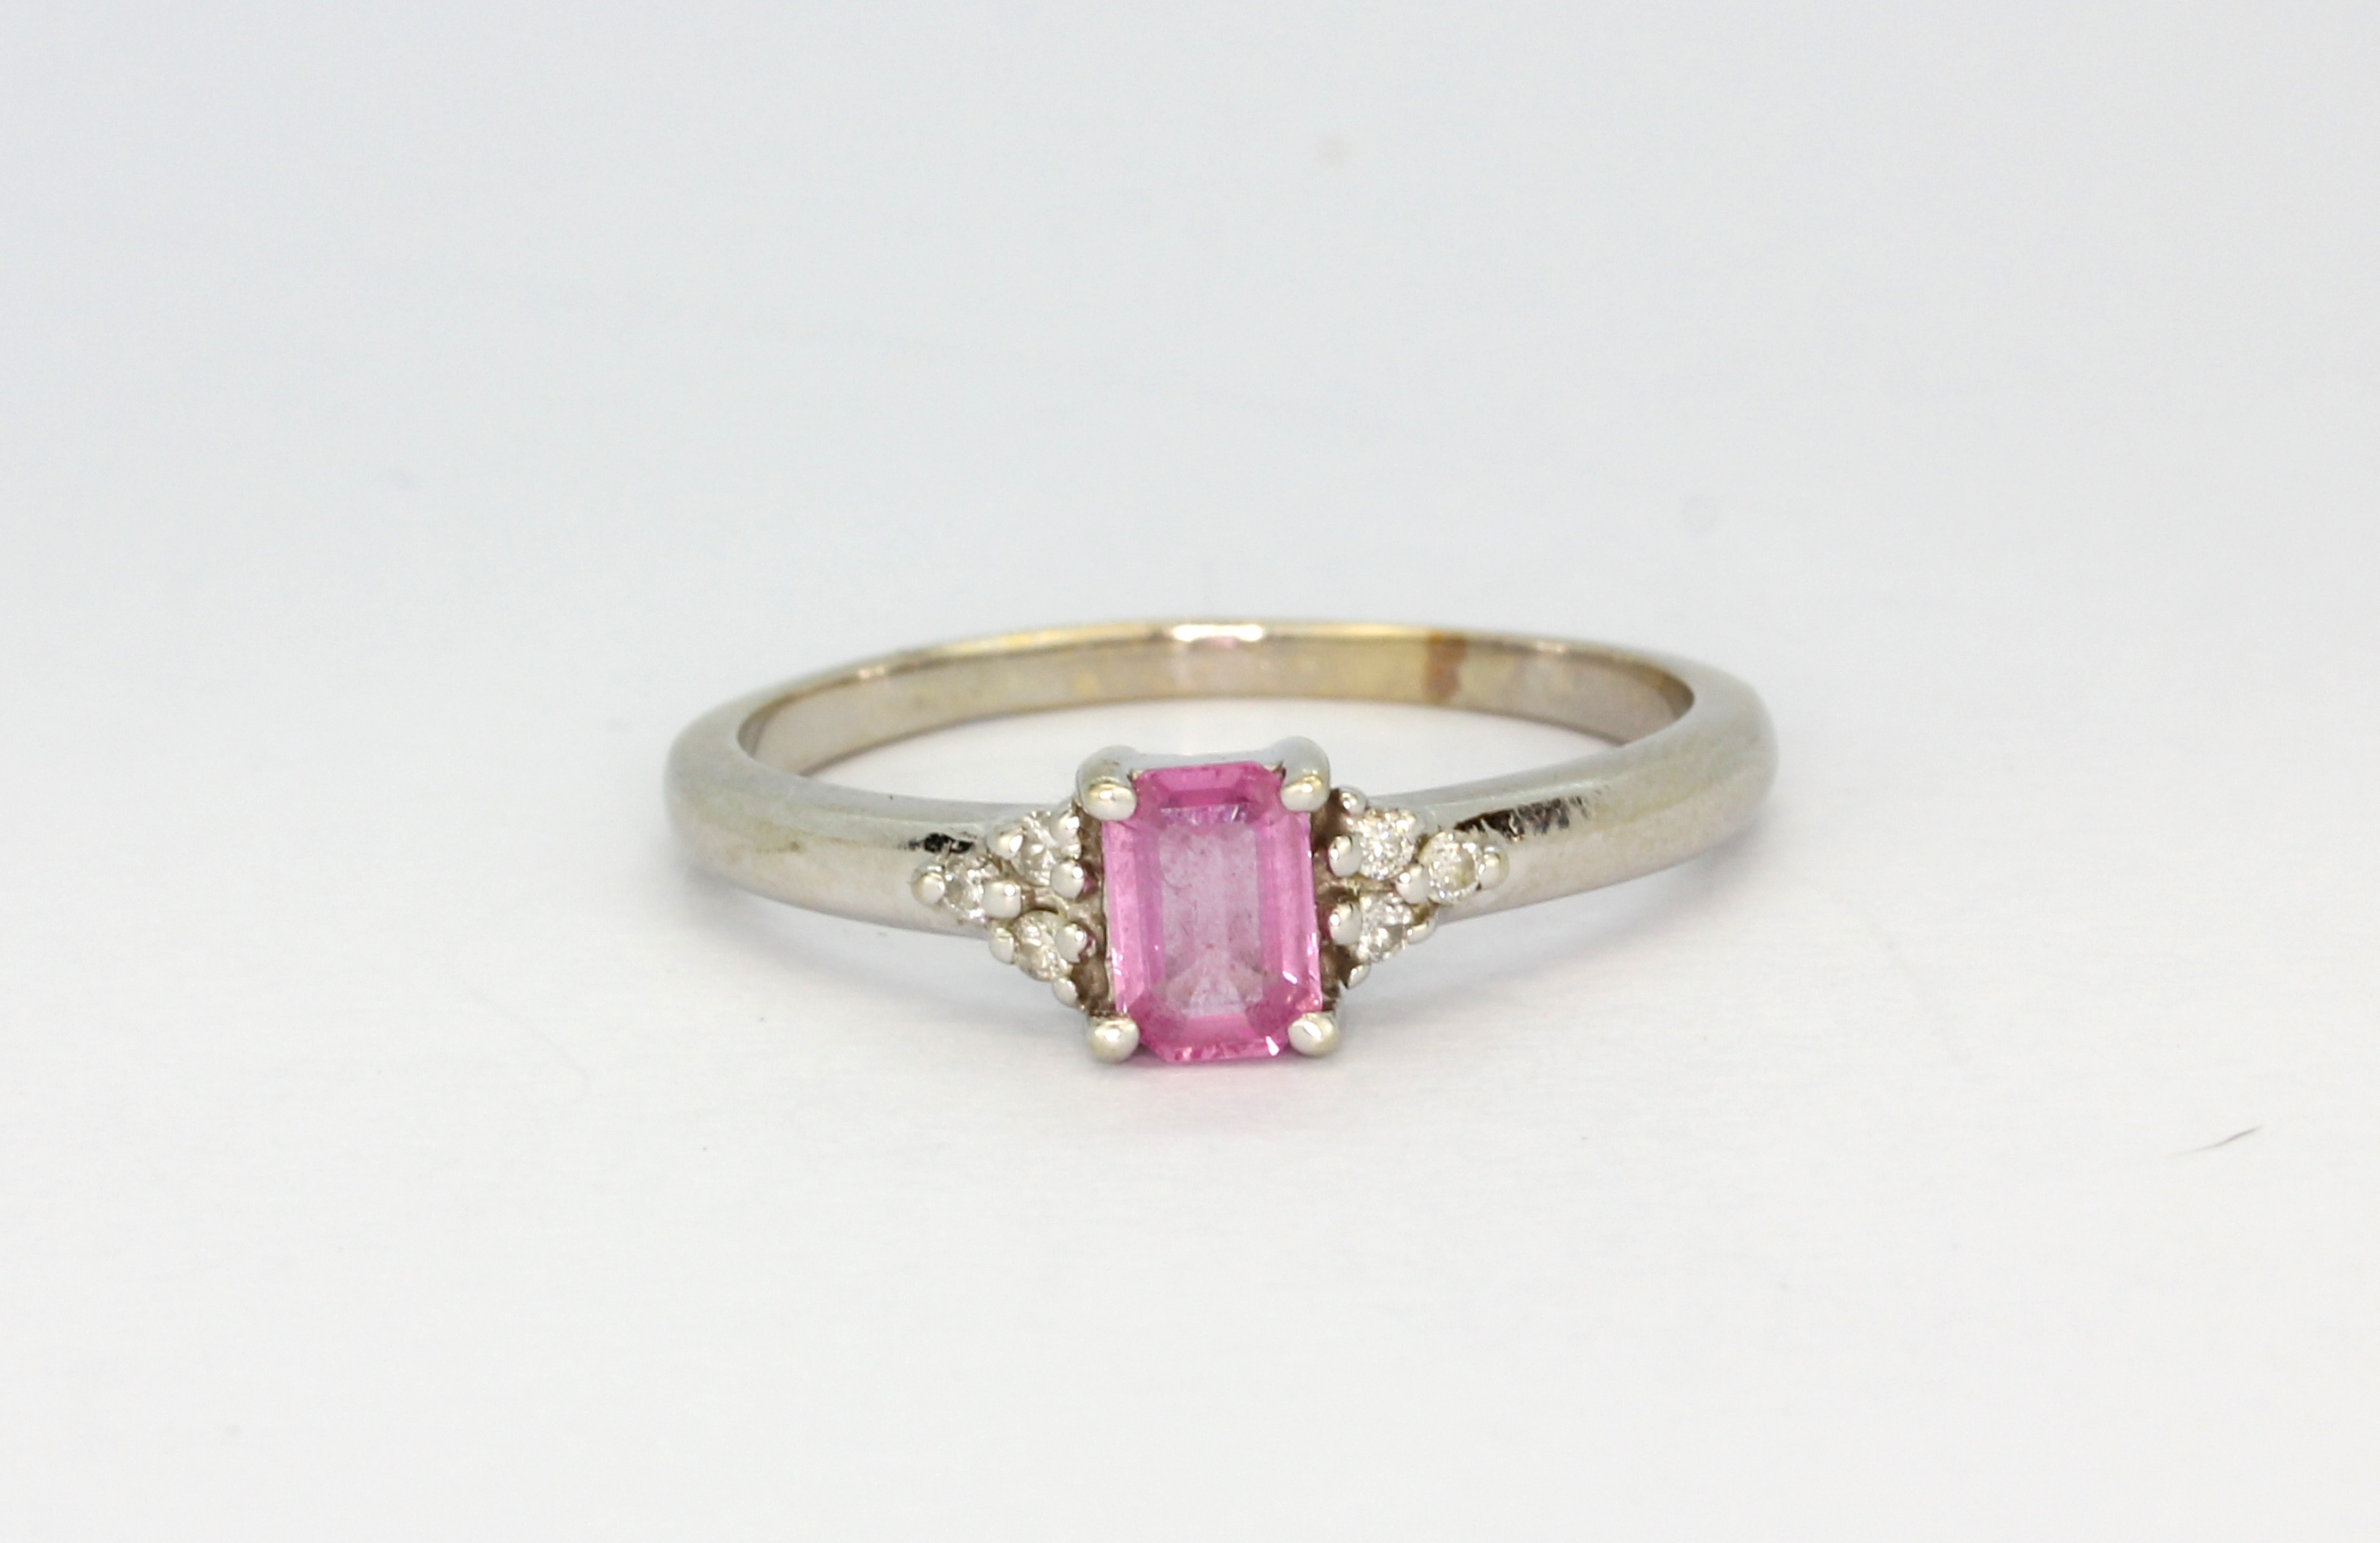 A 14ct white gold (stamped 14k) solitaire ring set with an emerald cut pink sapphire and diamond set